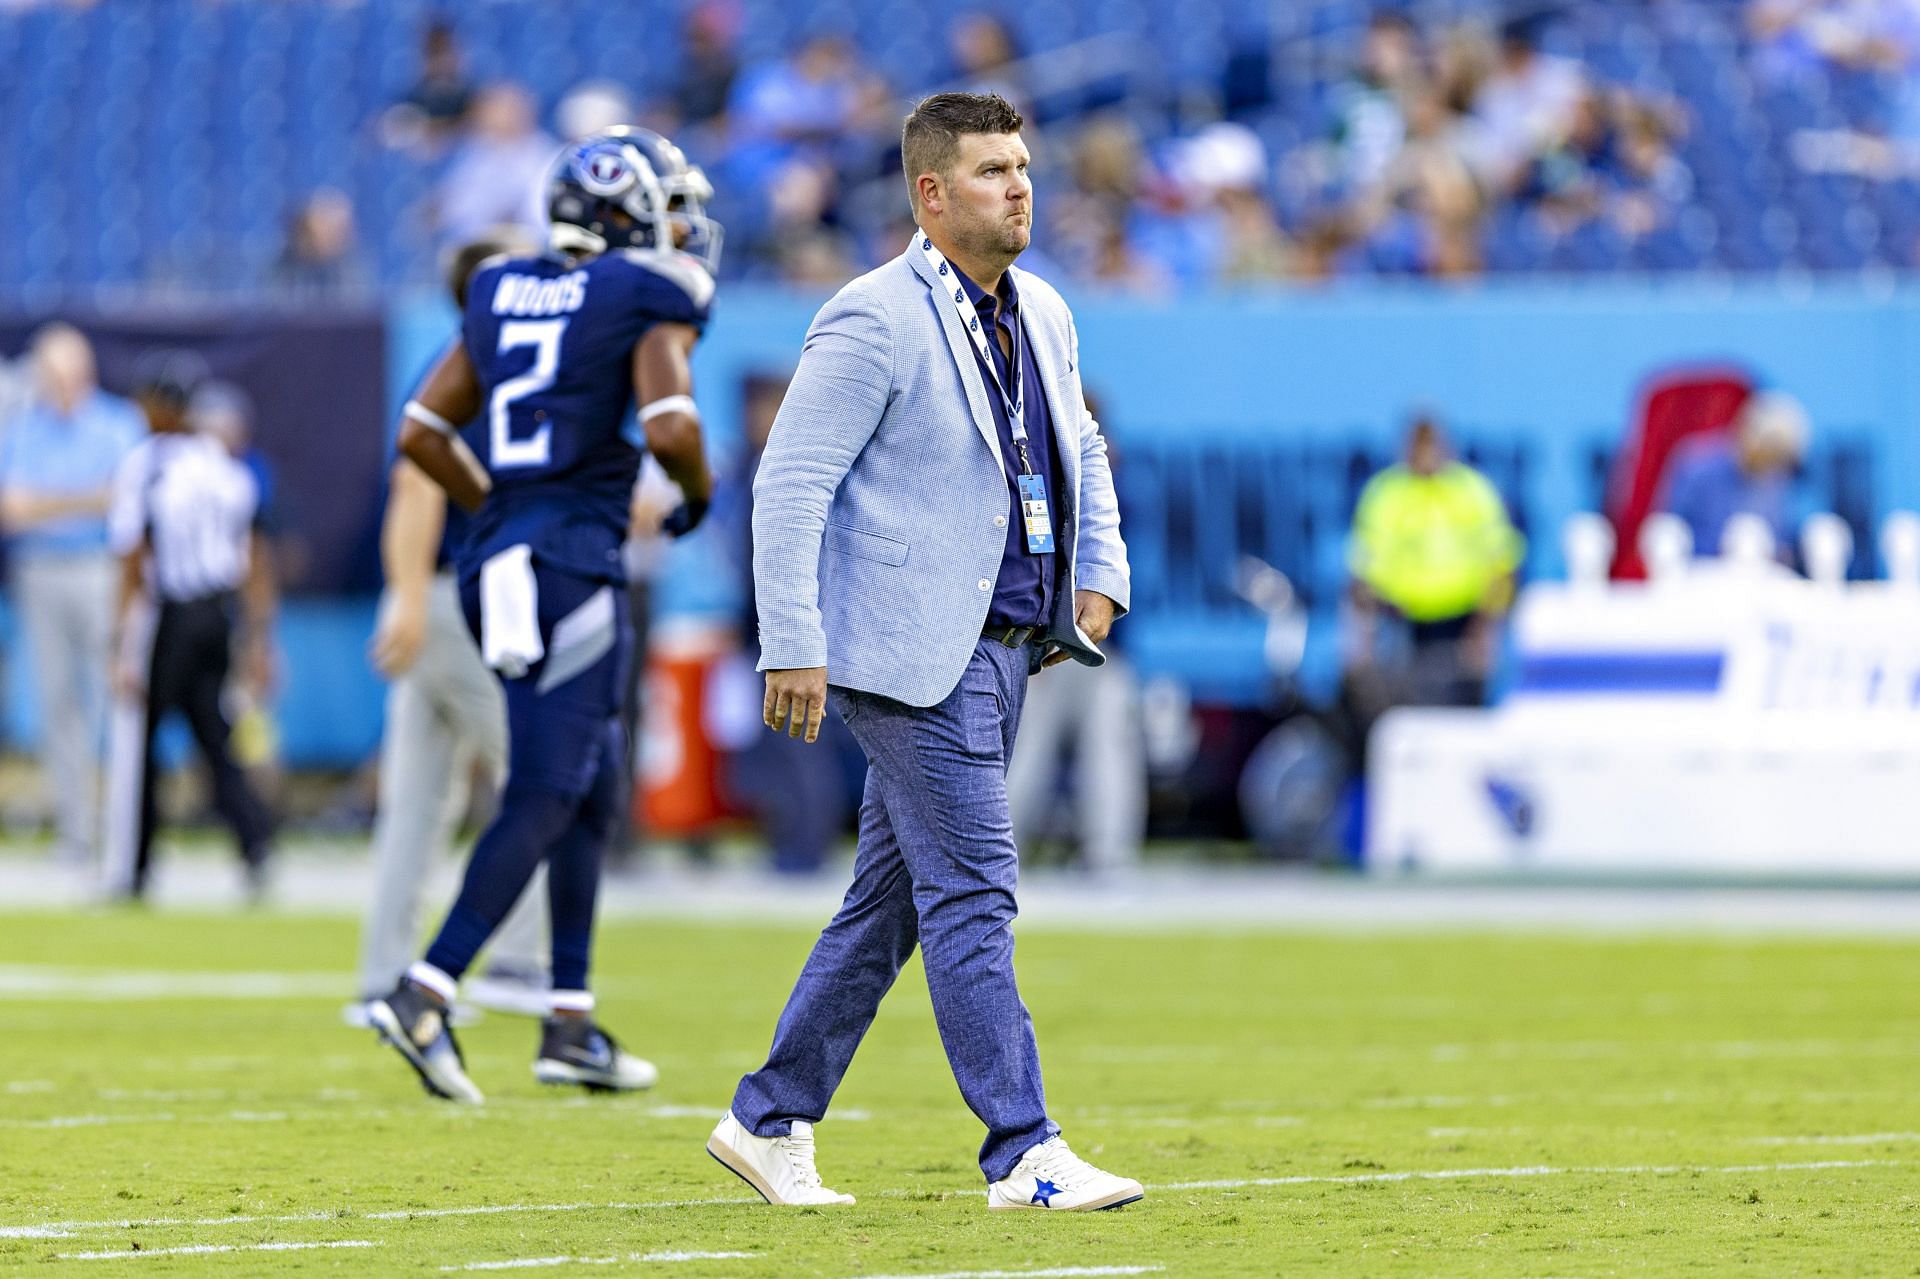 Jon Robinson fired: Titans axe GM after humiliating loss vs. Eagles